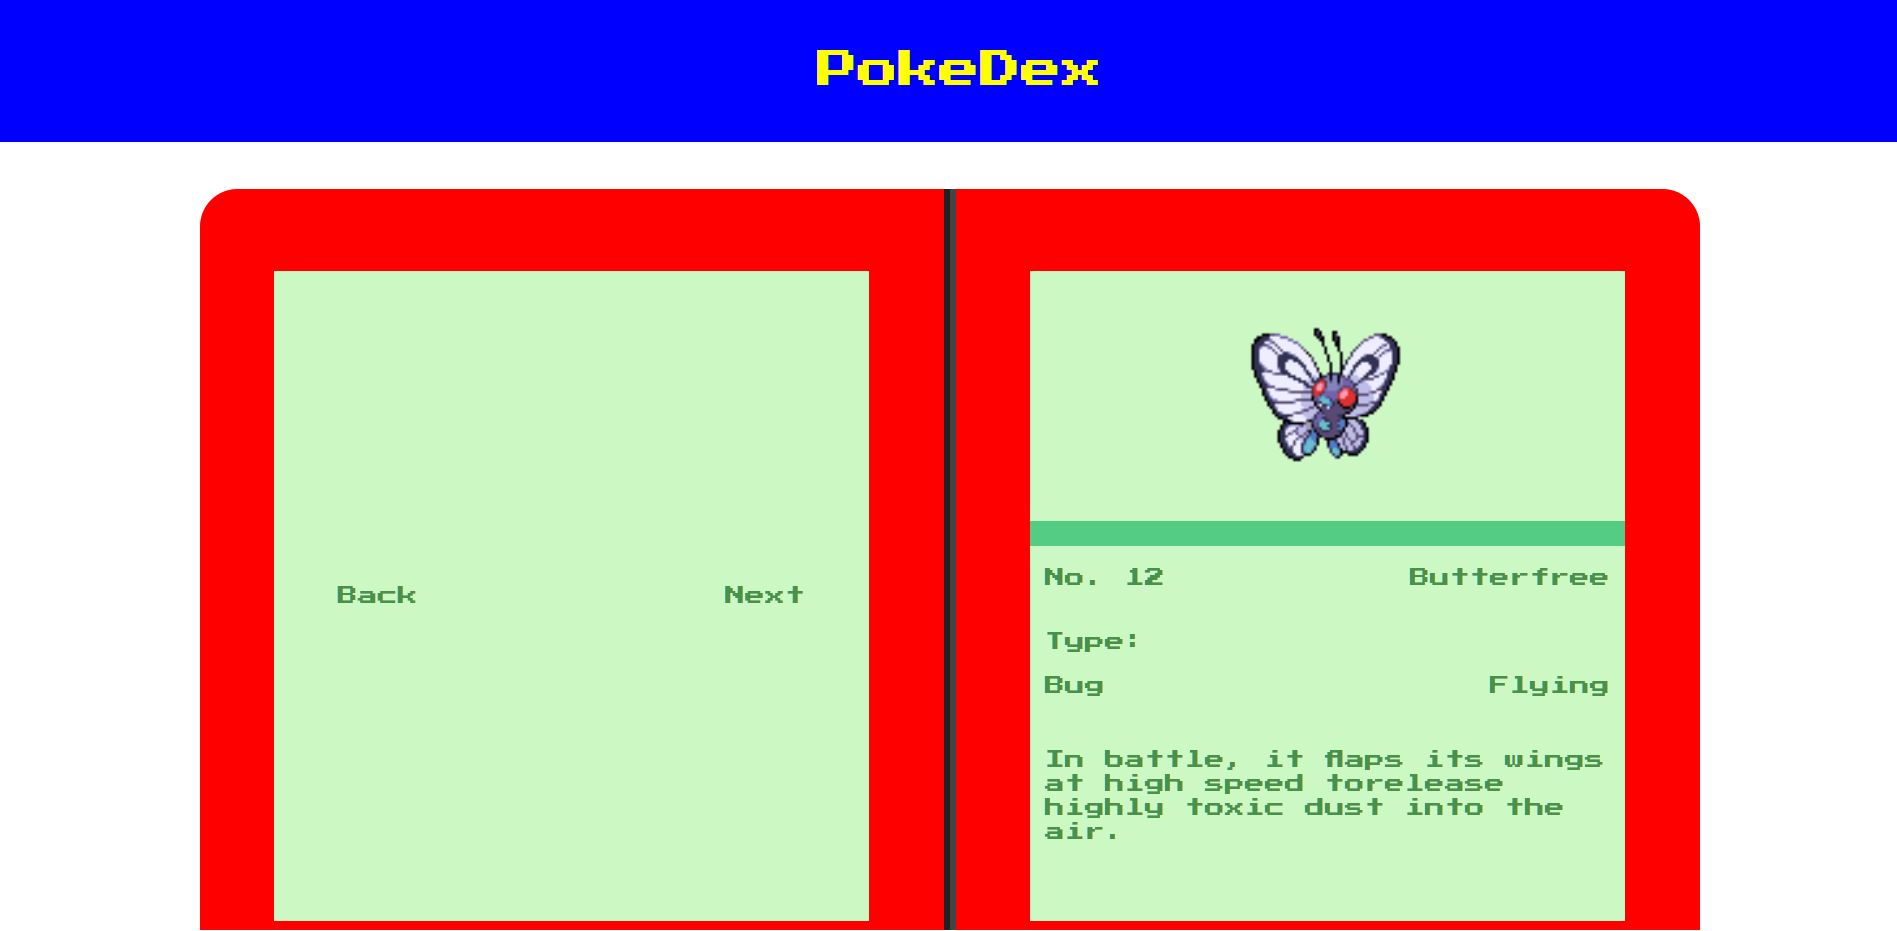 Preview still image of a pokedex.